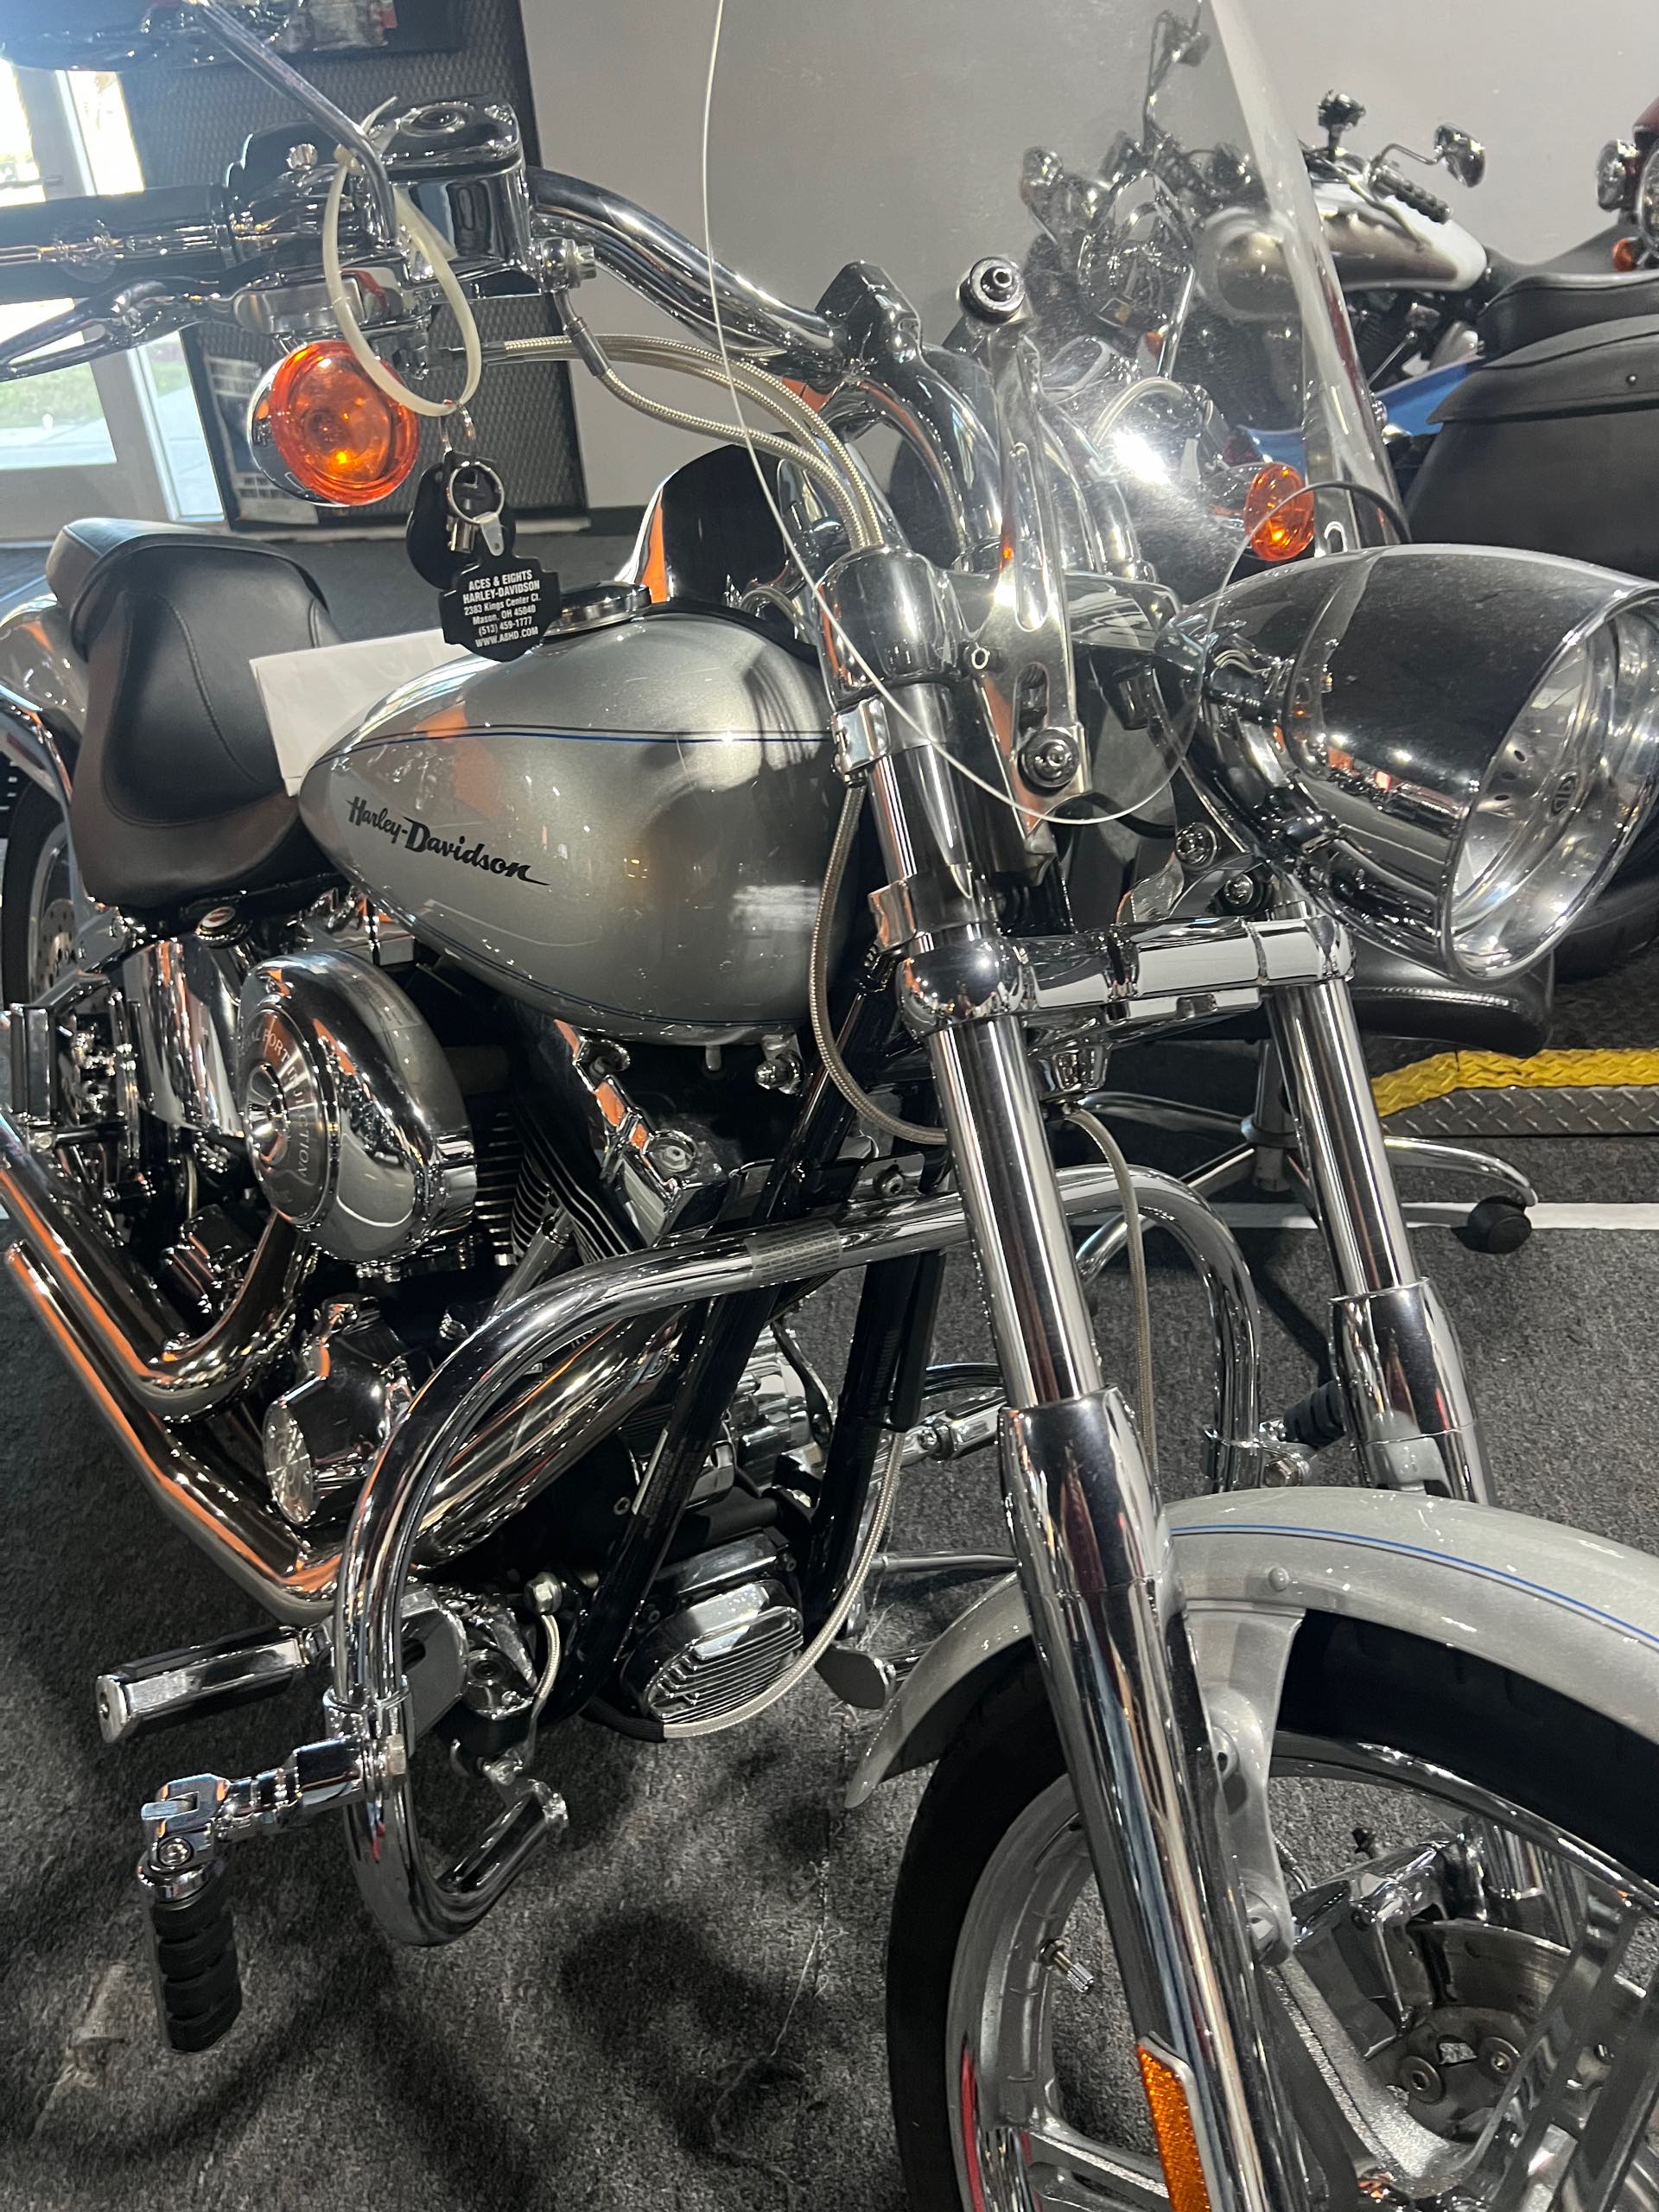 2006 Harley-Davidson Softail Deuce at Southwest Cycle, Cape Coral, FL 33909